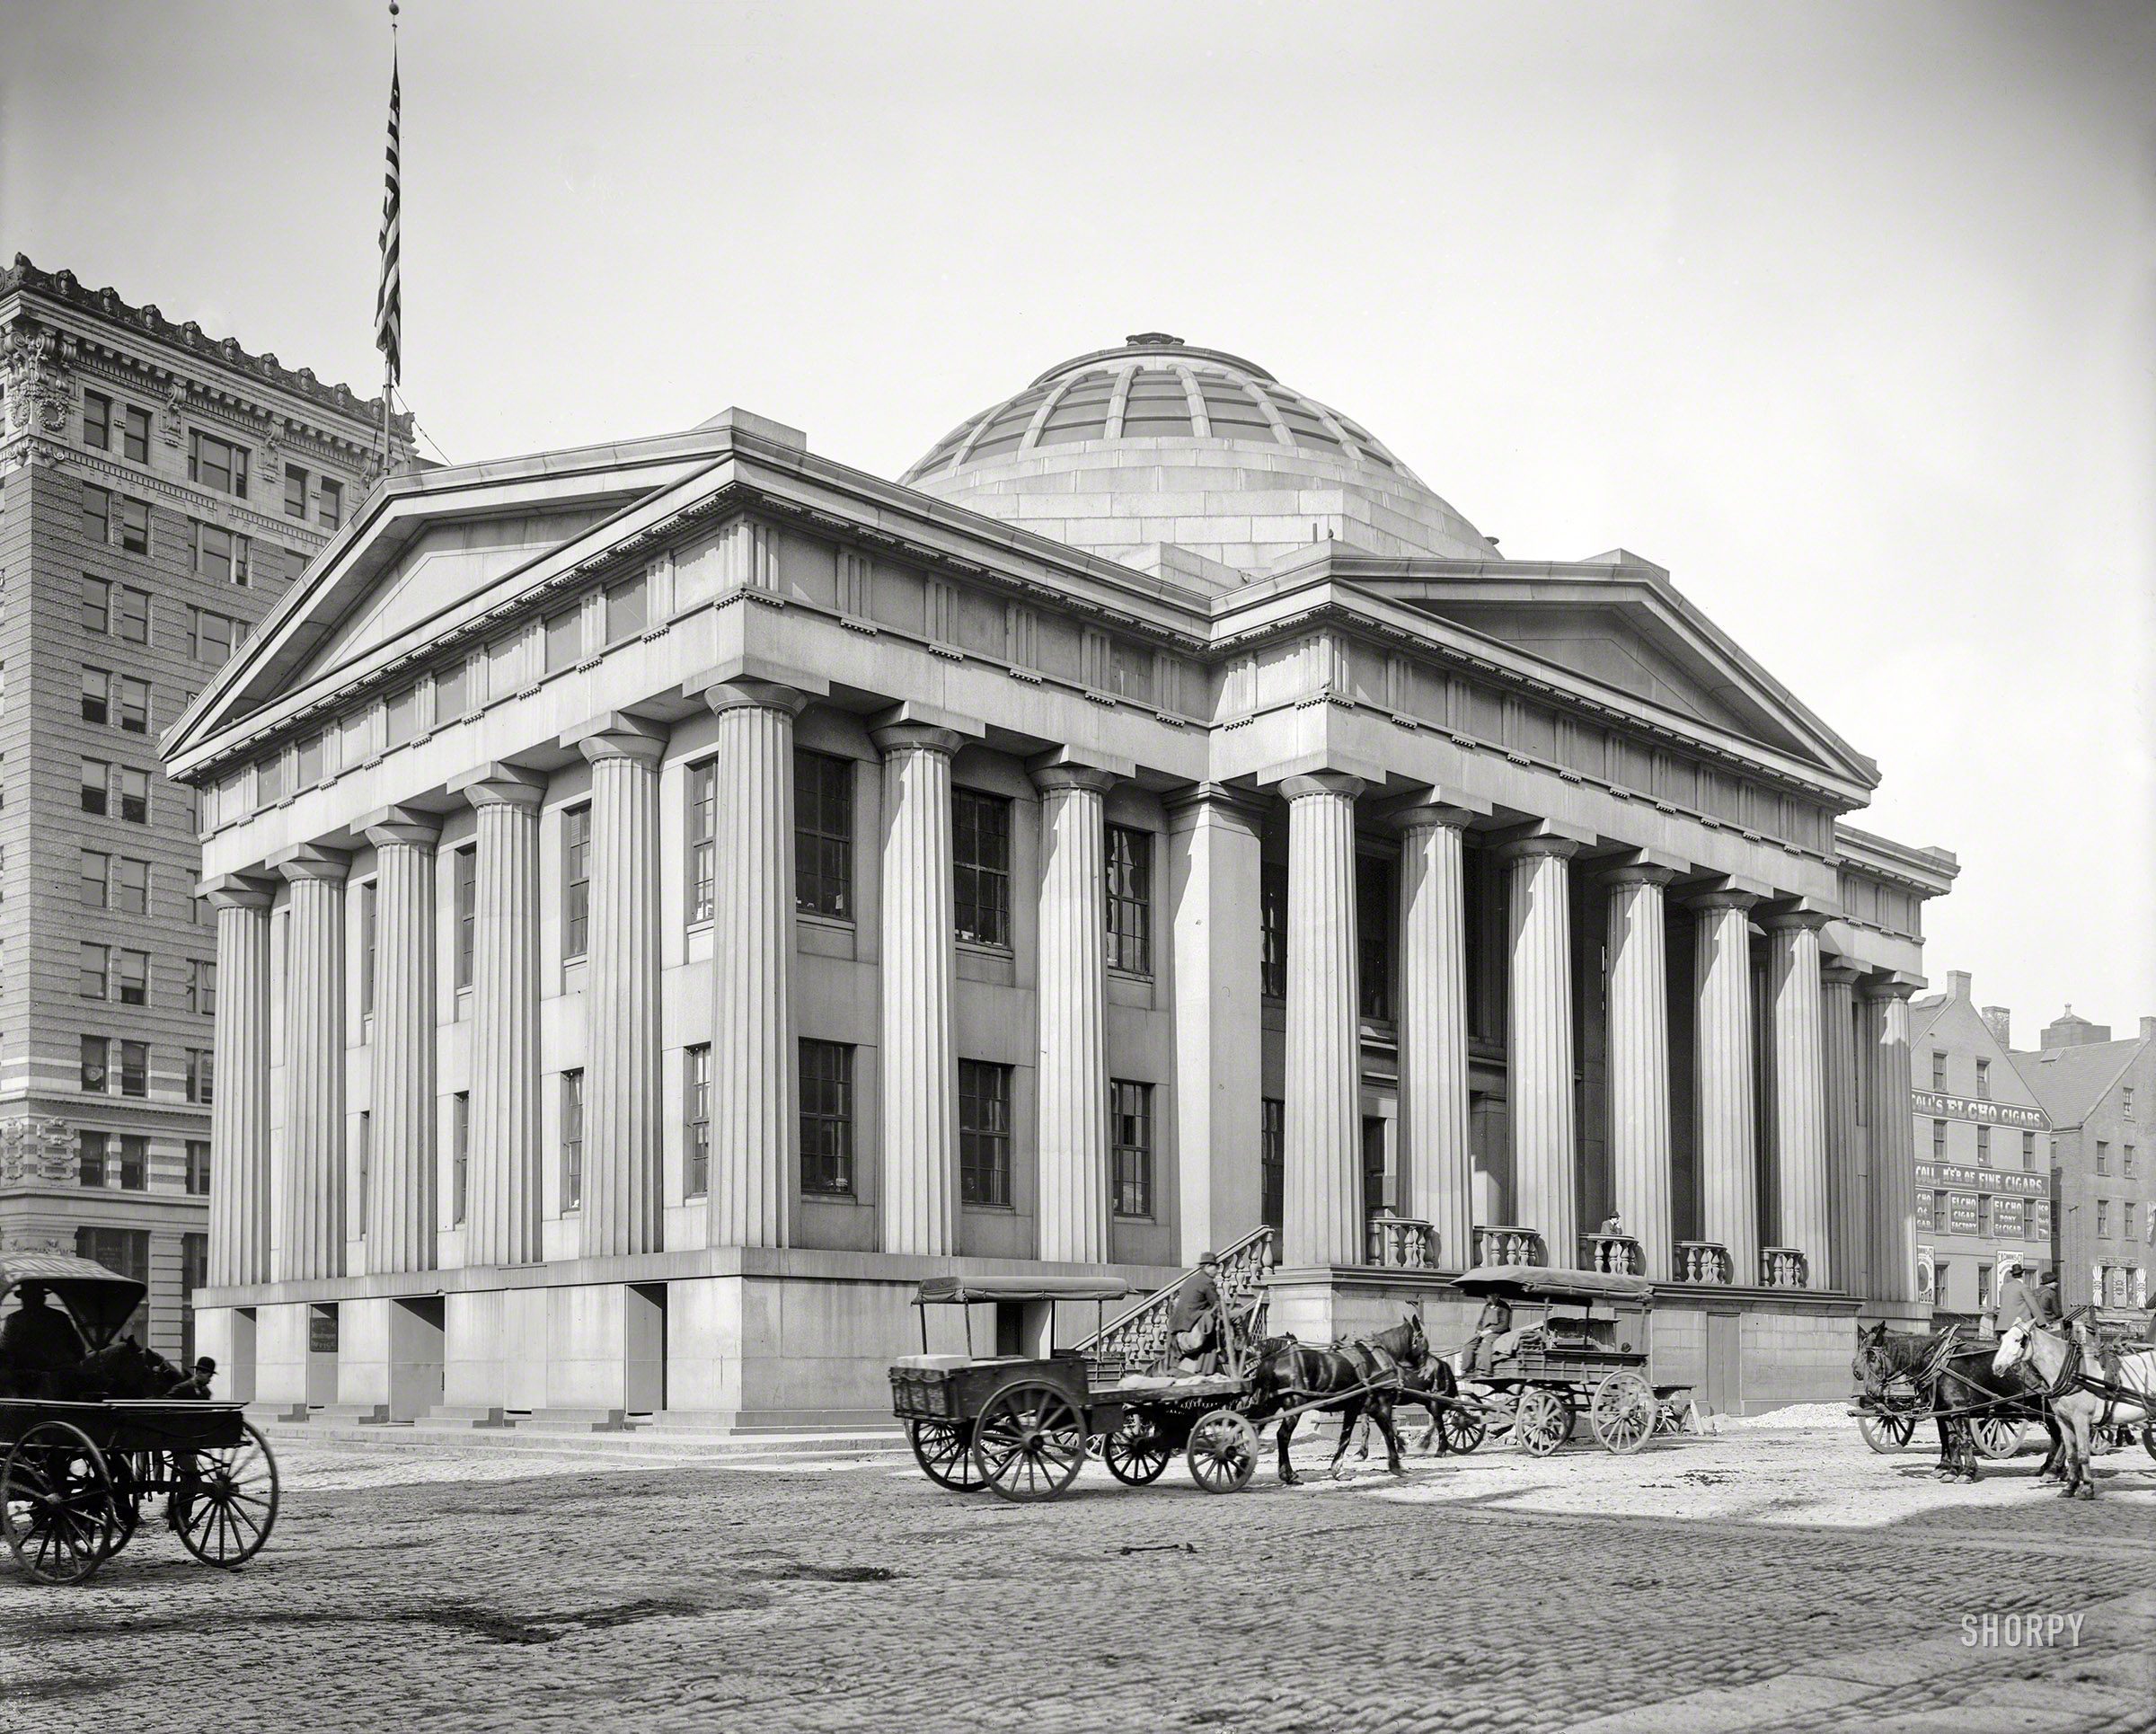 &nbsp; &nbsp; &nbsp; &nbsp; The 1849 Custom House, built at the end of the city docks, was used by the federal government to collect maritime duties in the age of Boston clipper ships. In 1915, after land reclamation had filled in the waterfront, the dome was topped with a 500-foot tower.
Circa 1906. "Custom House -- Boston, Massachusetts." 8x10 inch dry plate glass negative, Detroit Publishing Company. View full size.